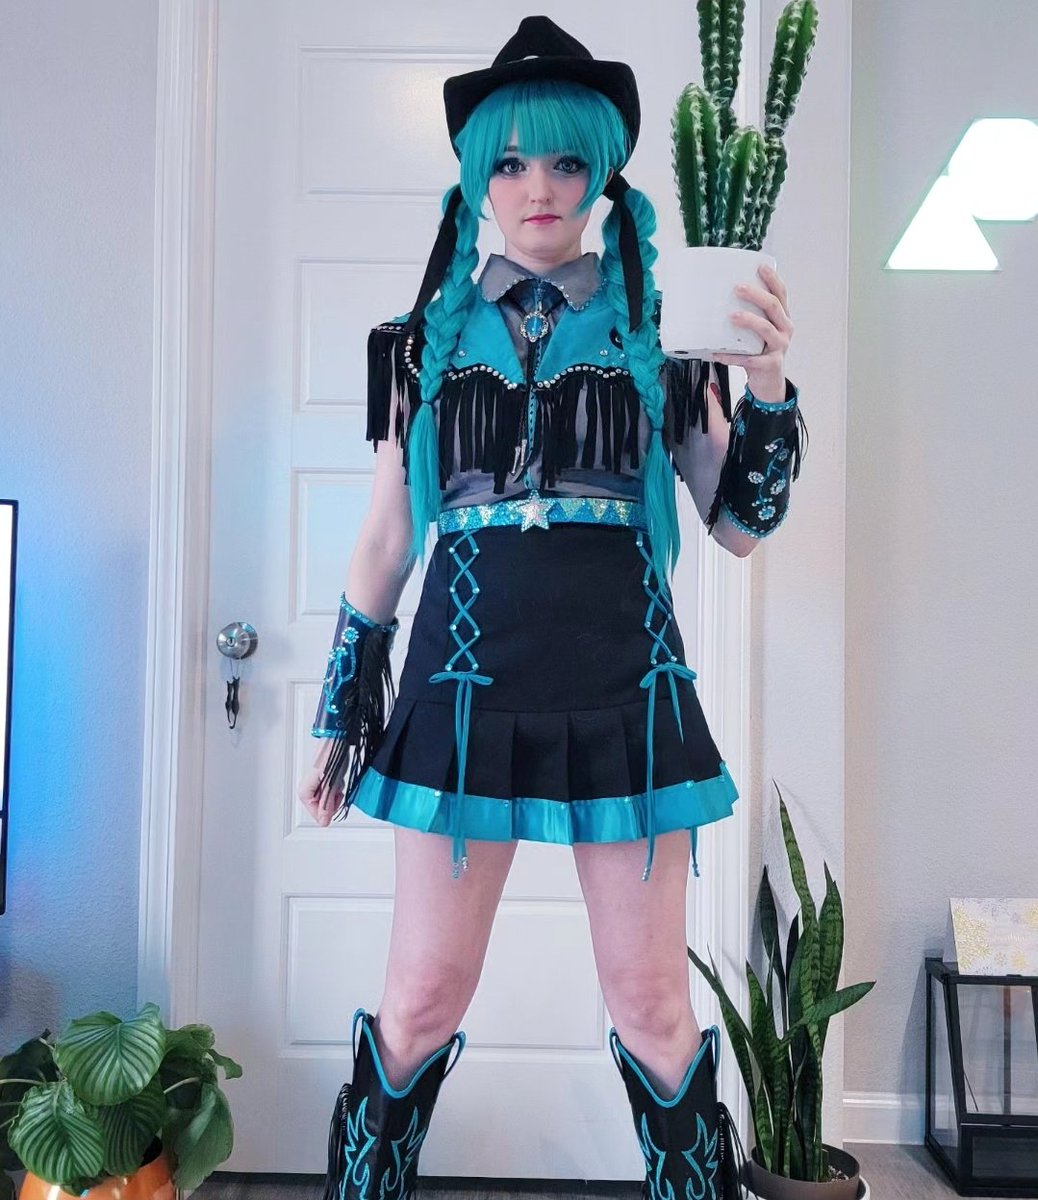 @Im_the_other_Su Hiii this is me! Thank y'all for all the love!! This costume means a lot to me 🥹 I put all my yeehaws into it!🤠💕 I've actually been creating casual Miku cowboy fits for 6 years but this was like my magnum opus lol